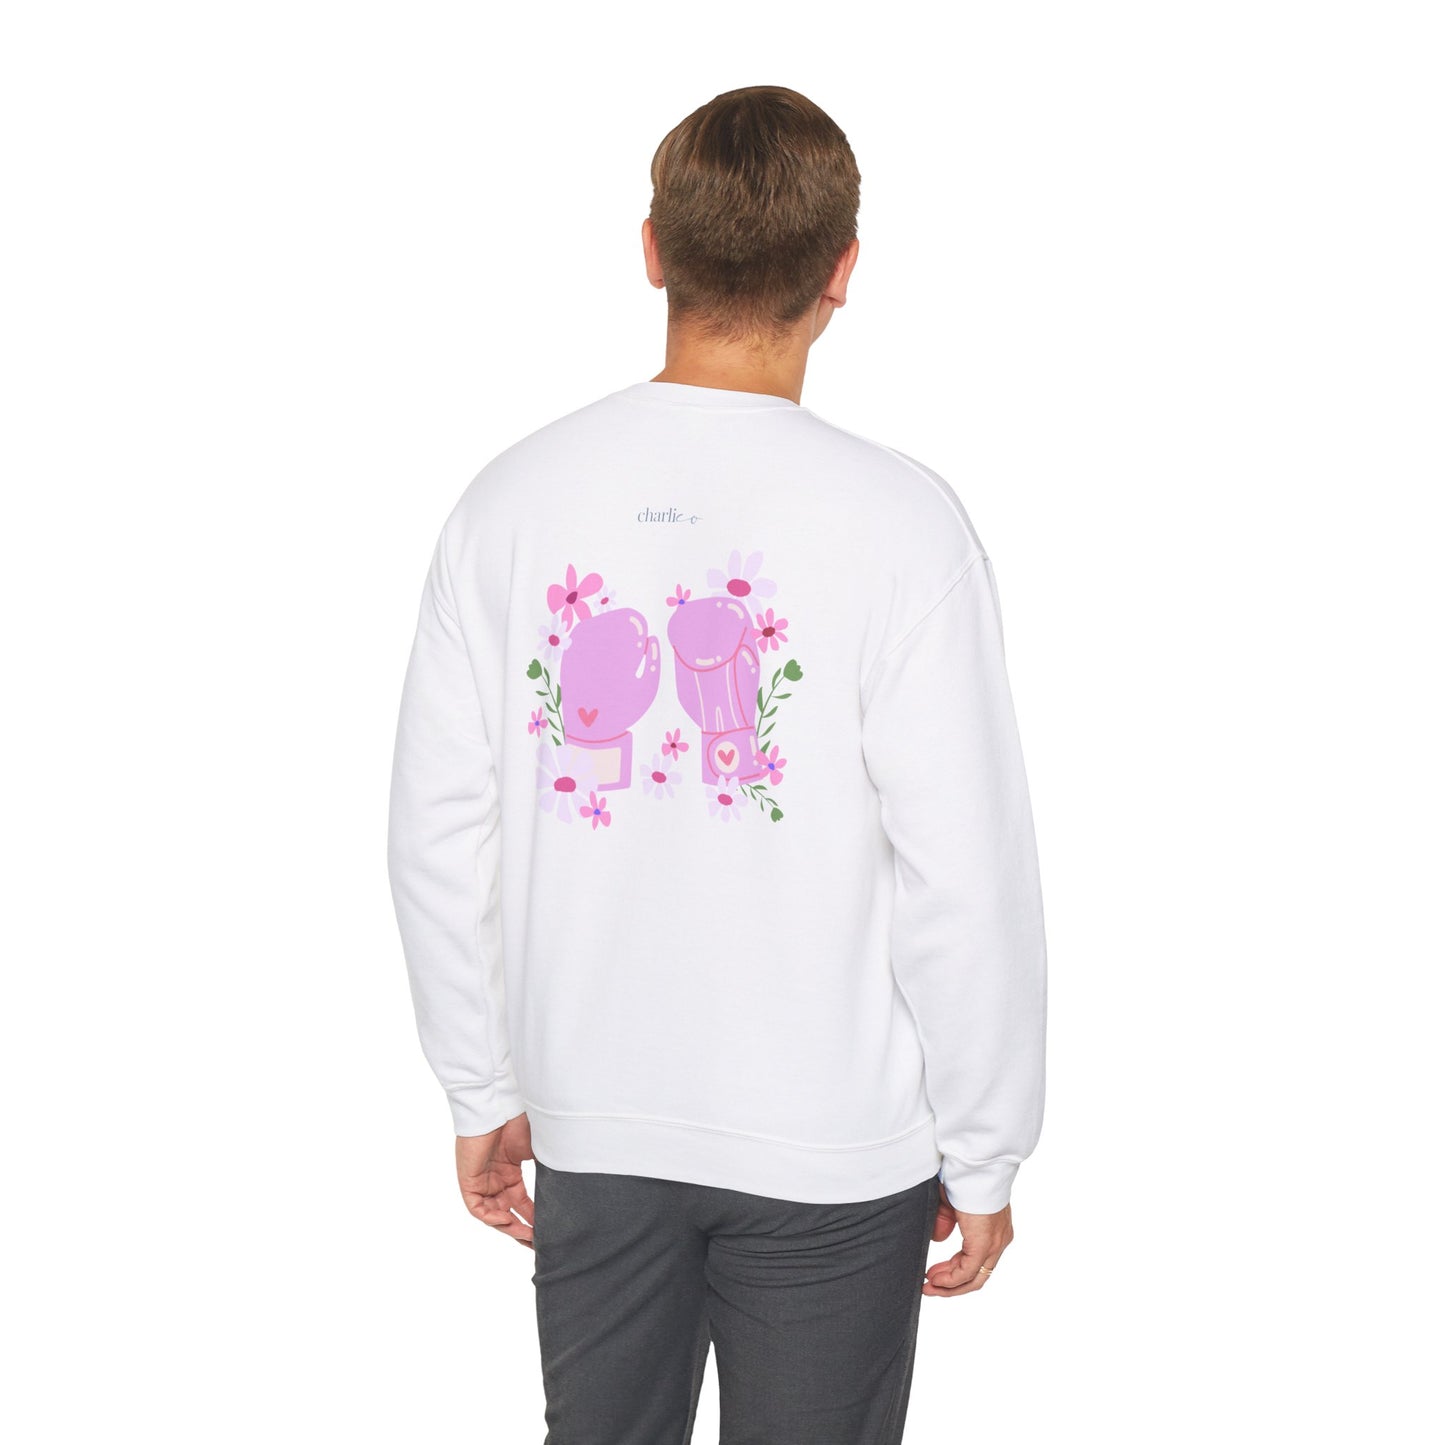 Printed crewneck sweatshirt -I HAVE THE STRENGTH- for adults